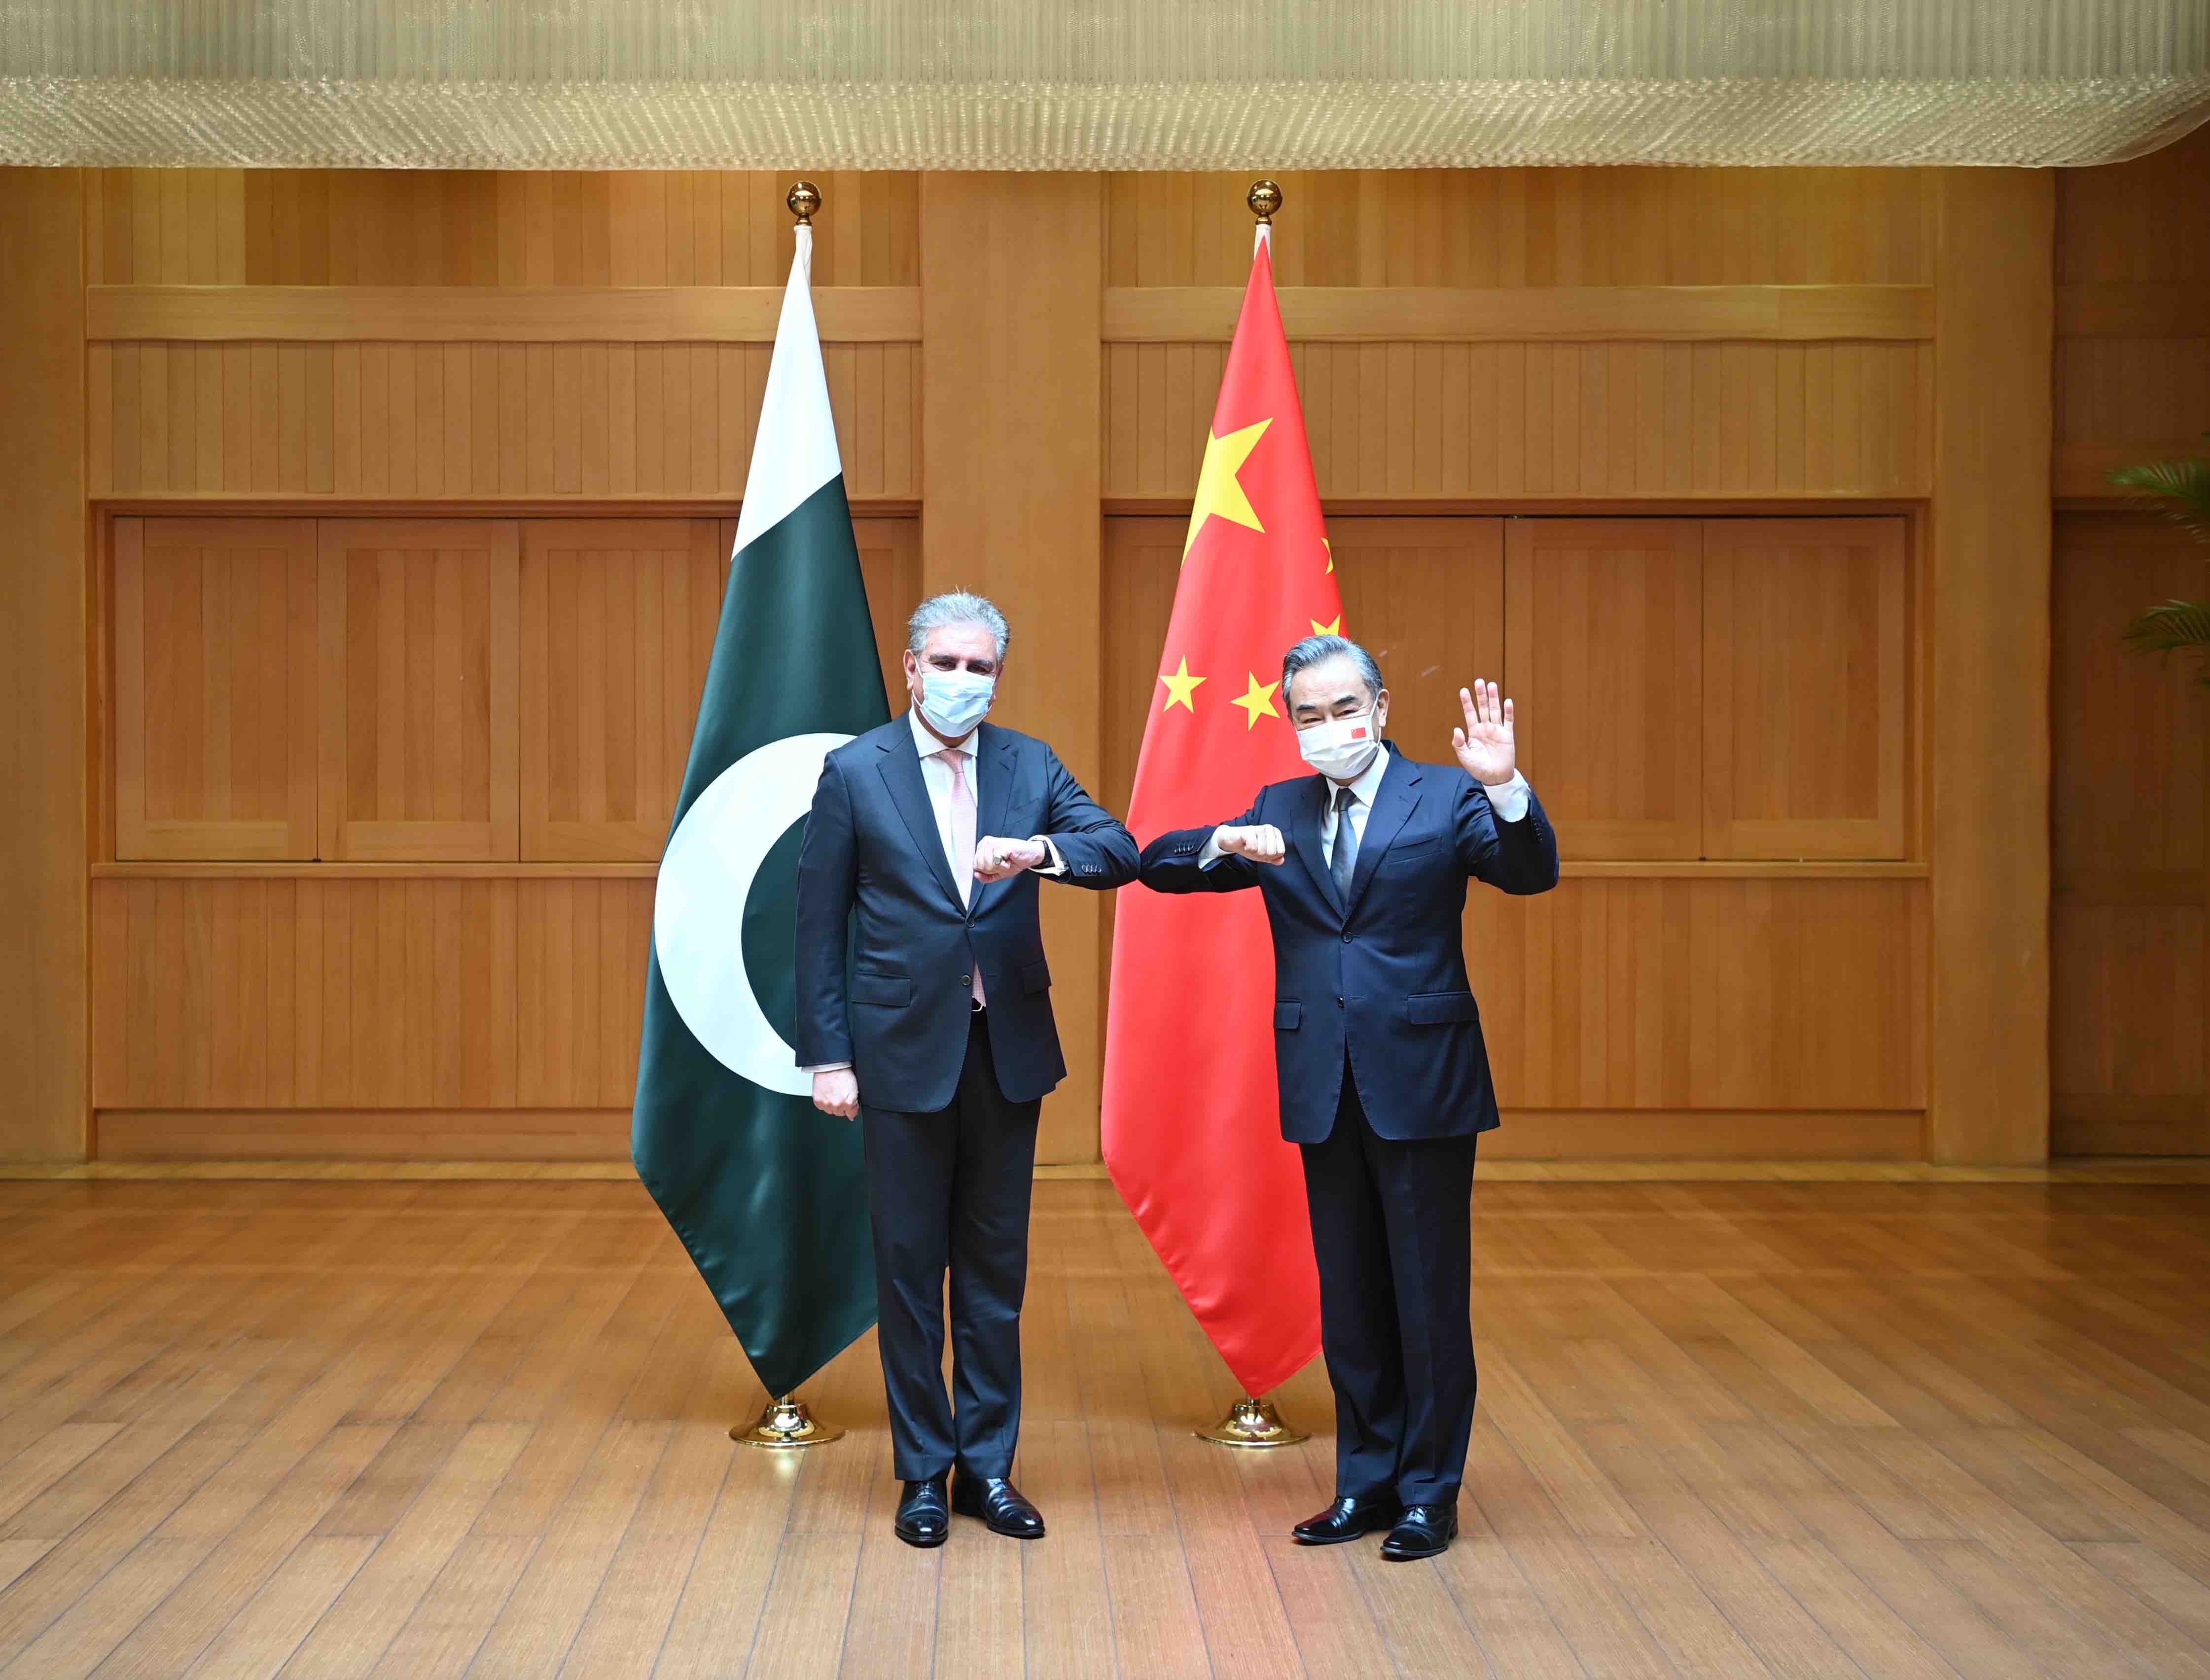 Chinese and Pakistan foreign ministers Wang Yi (right) and Shah Mahmood Qureshi during their meeting in Chengdu on July 24. Photo: Xinhua